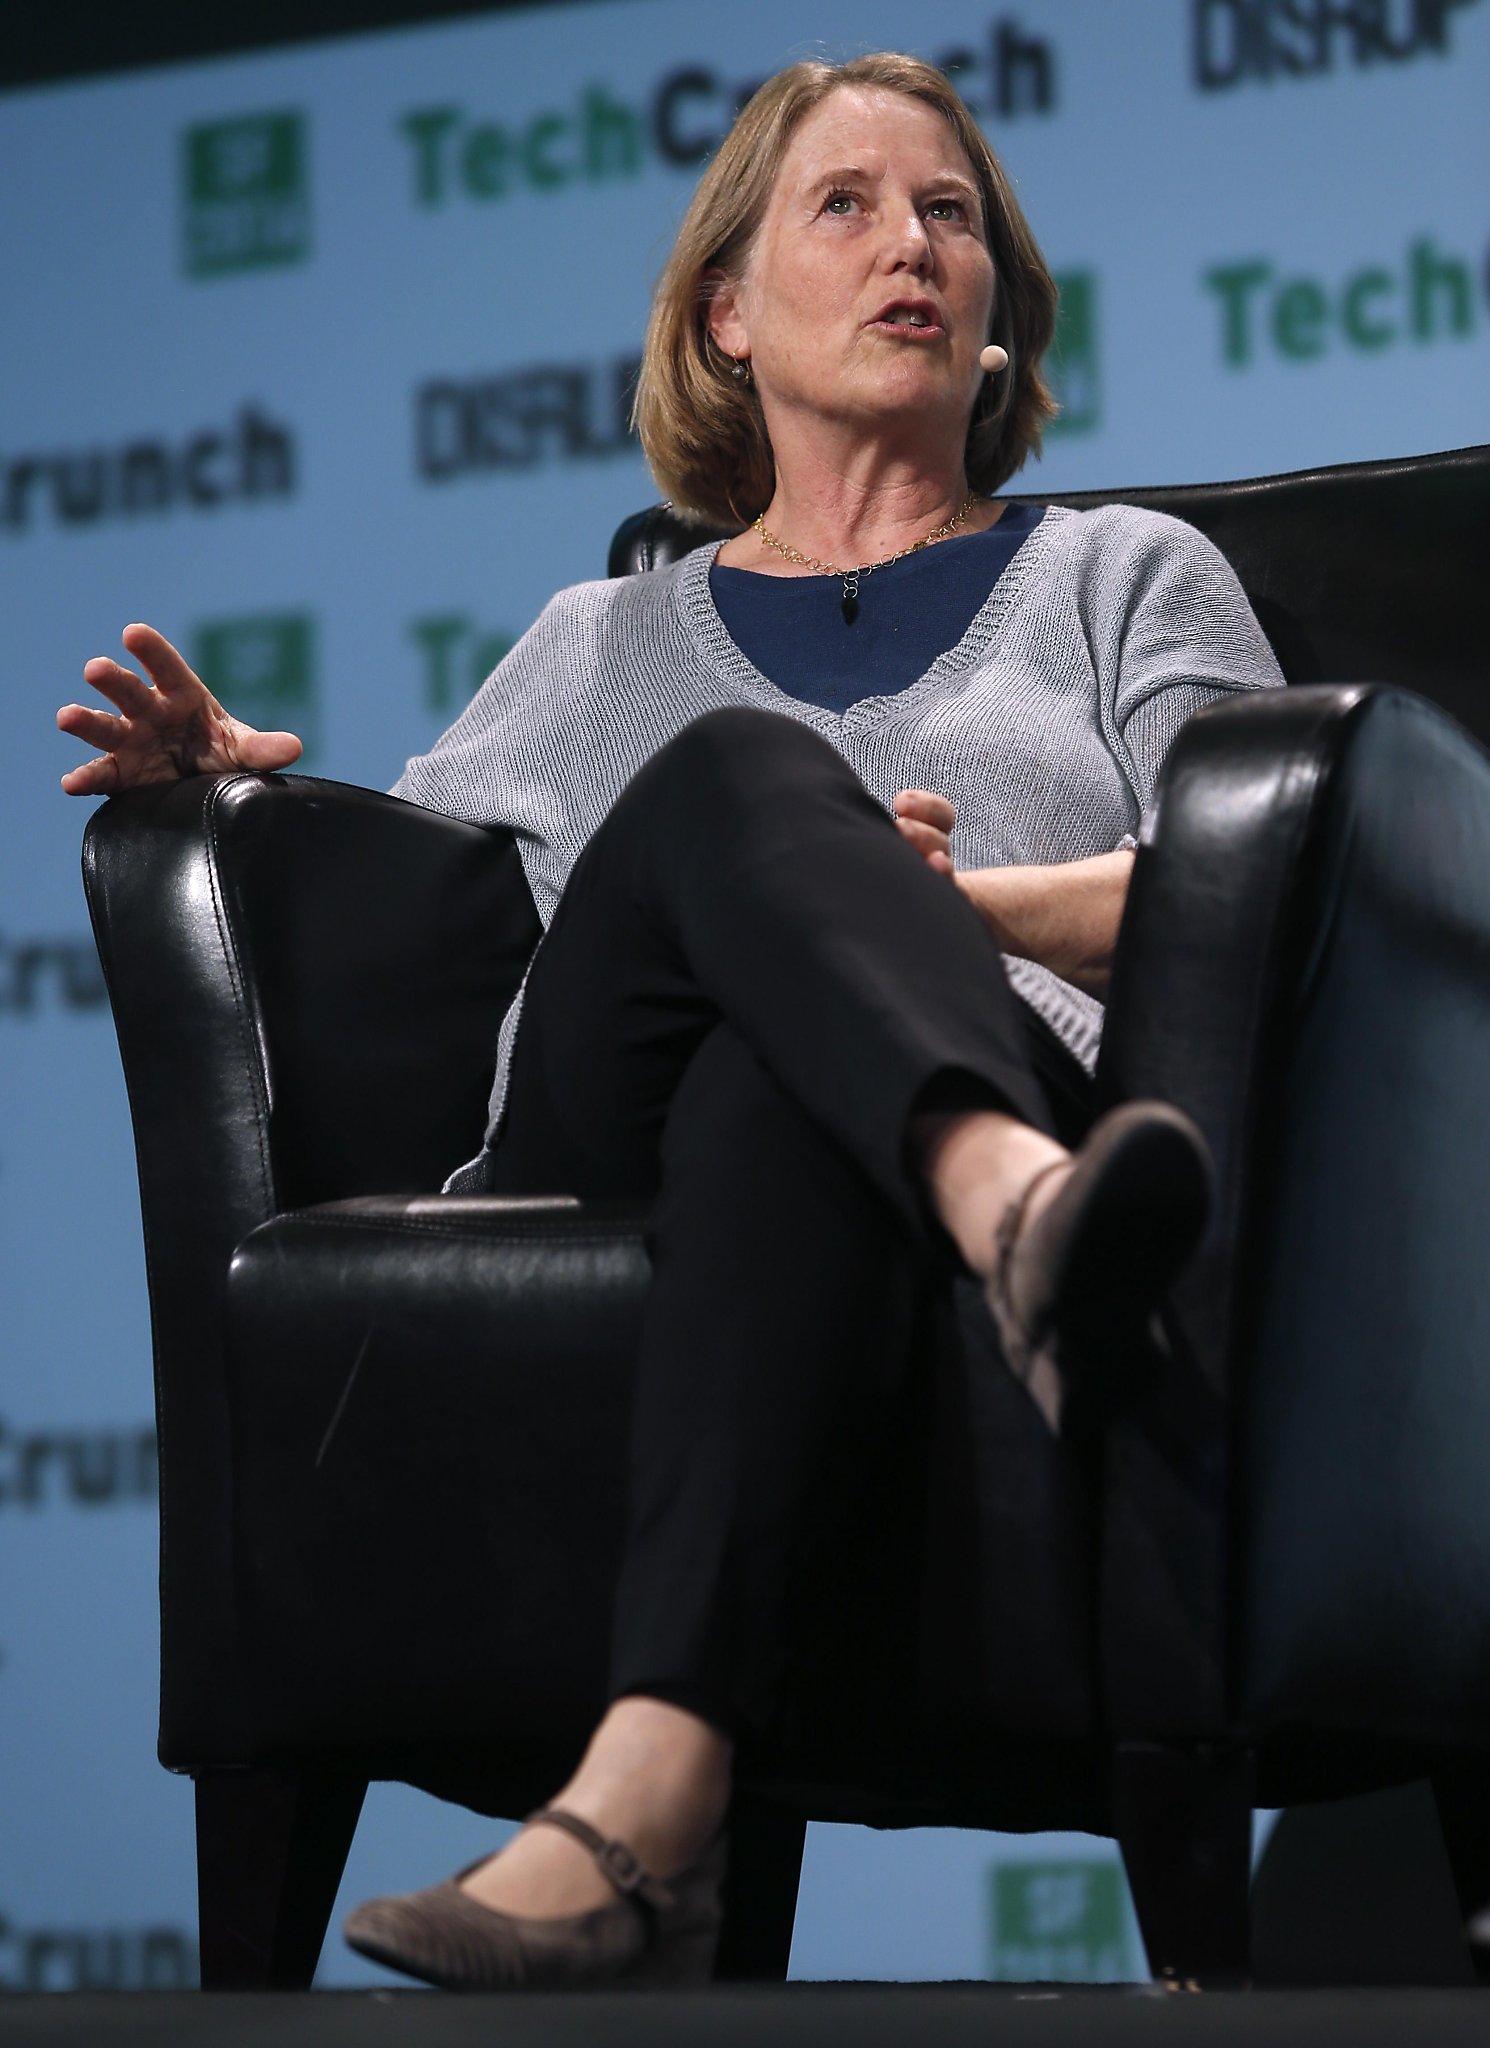 TechCrunch Disrupt shows an industry grappling with diversity